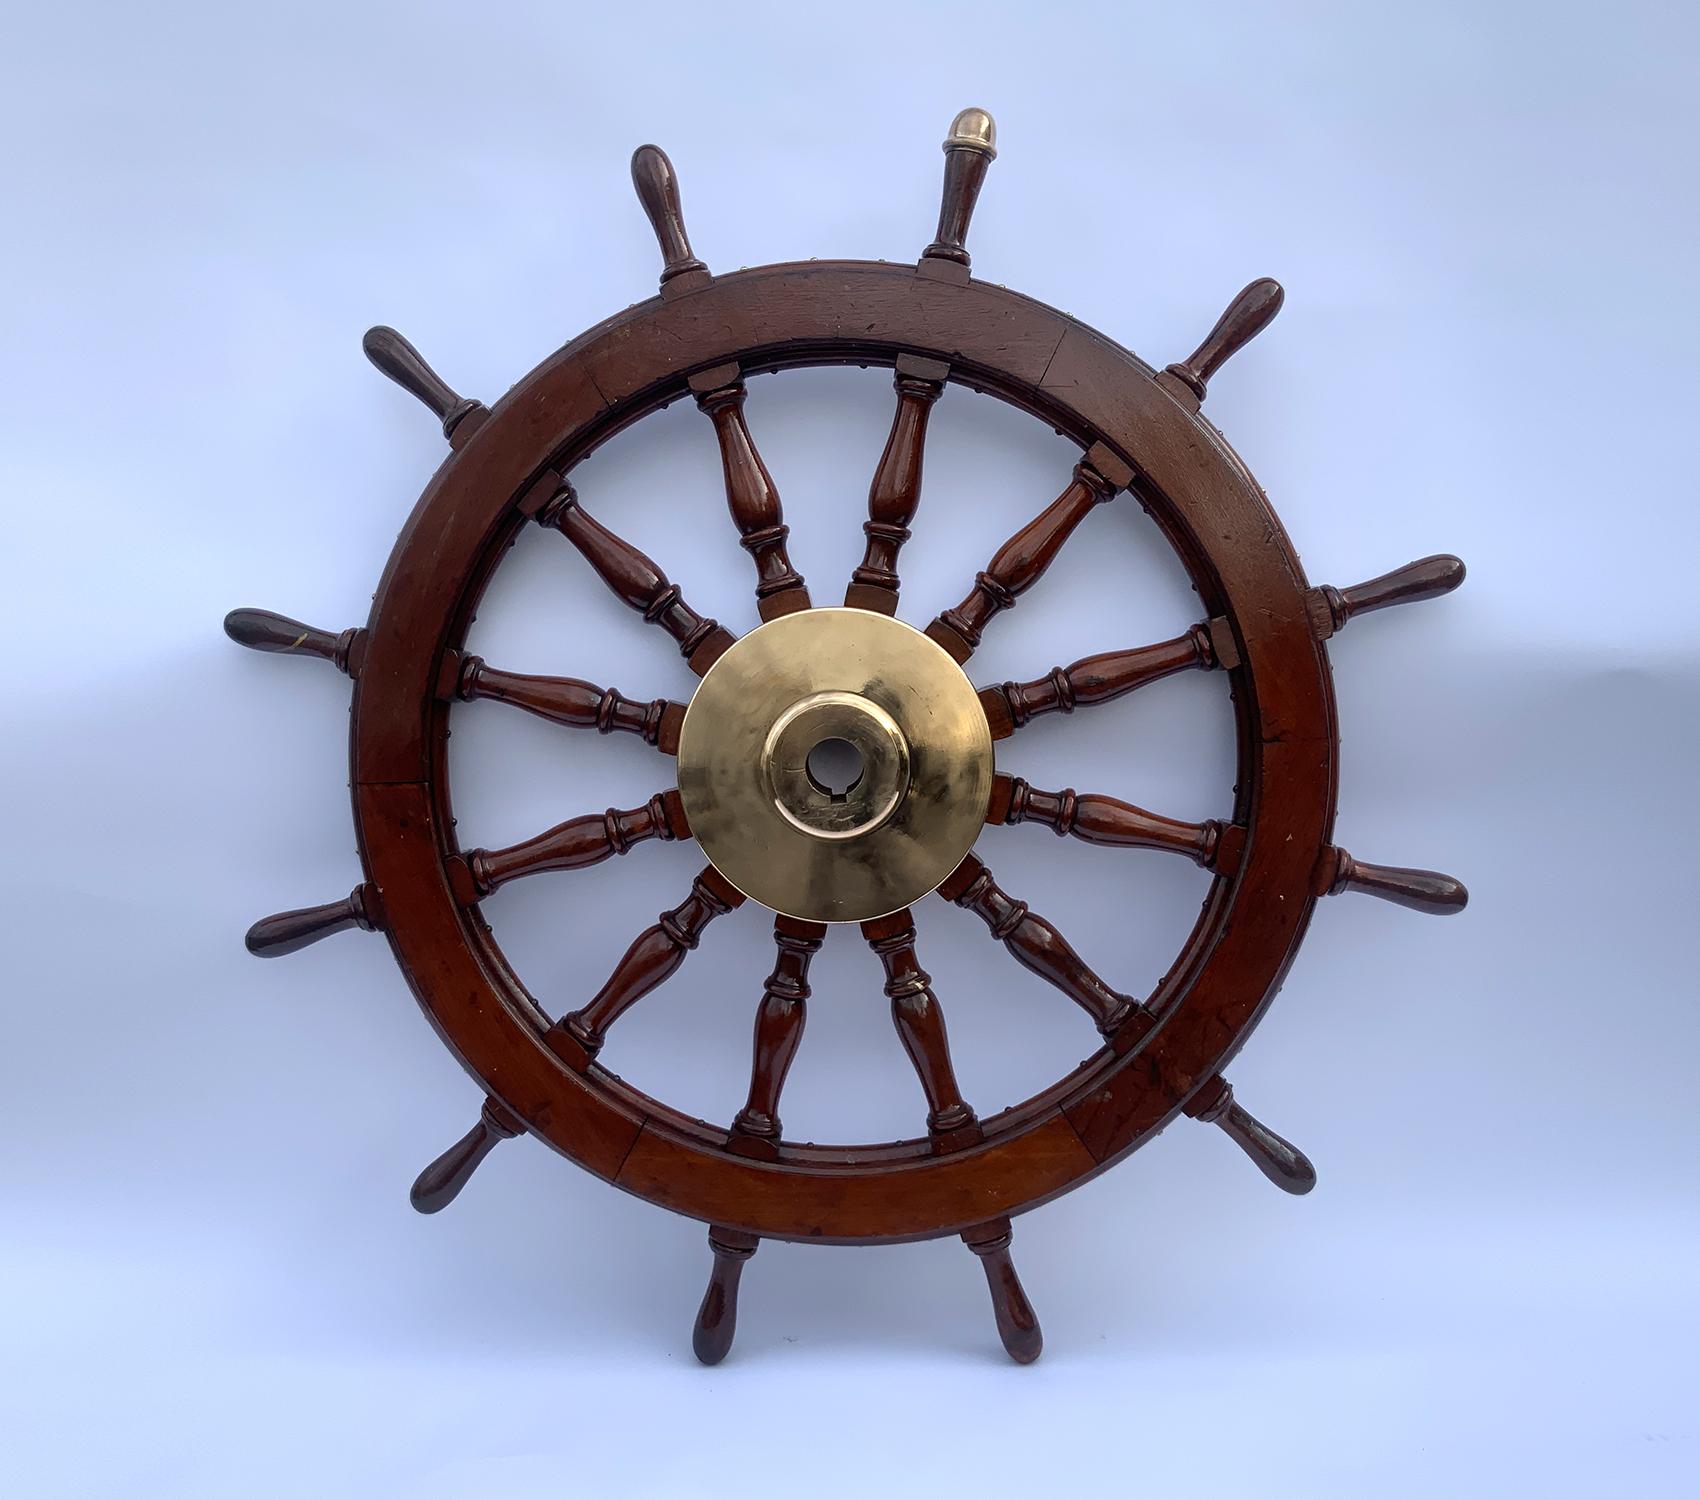 Antique five-foot ships wheel built to an exceptional standard of girth and strength. Massive brass hub with wide keyhole. Varnish finish on the hardwood wheel. Circa 1870. As heavy and impressive as they get.

Weight: 158 LBS
Overall Dimensions: